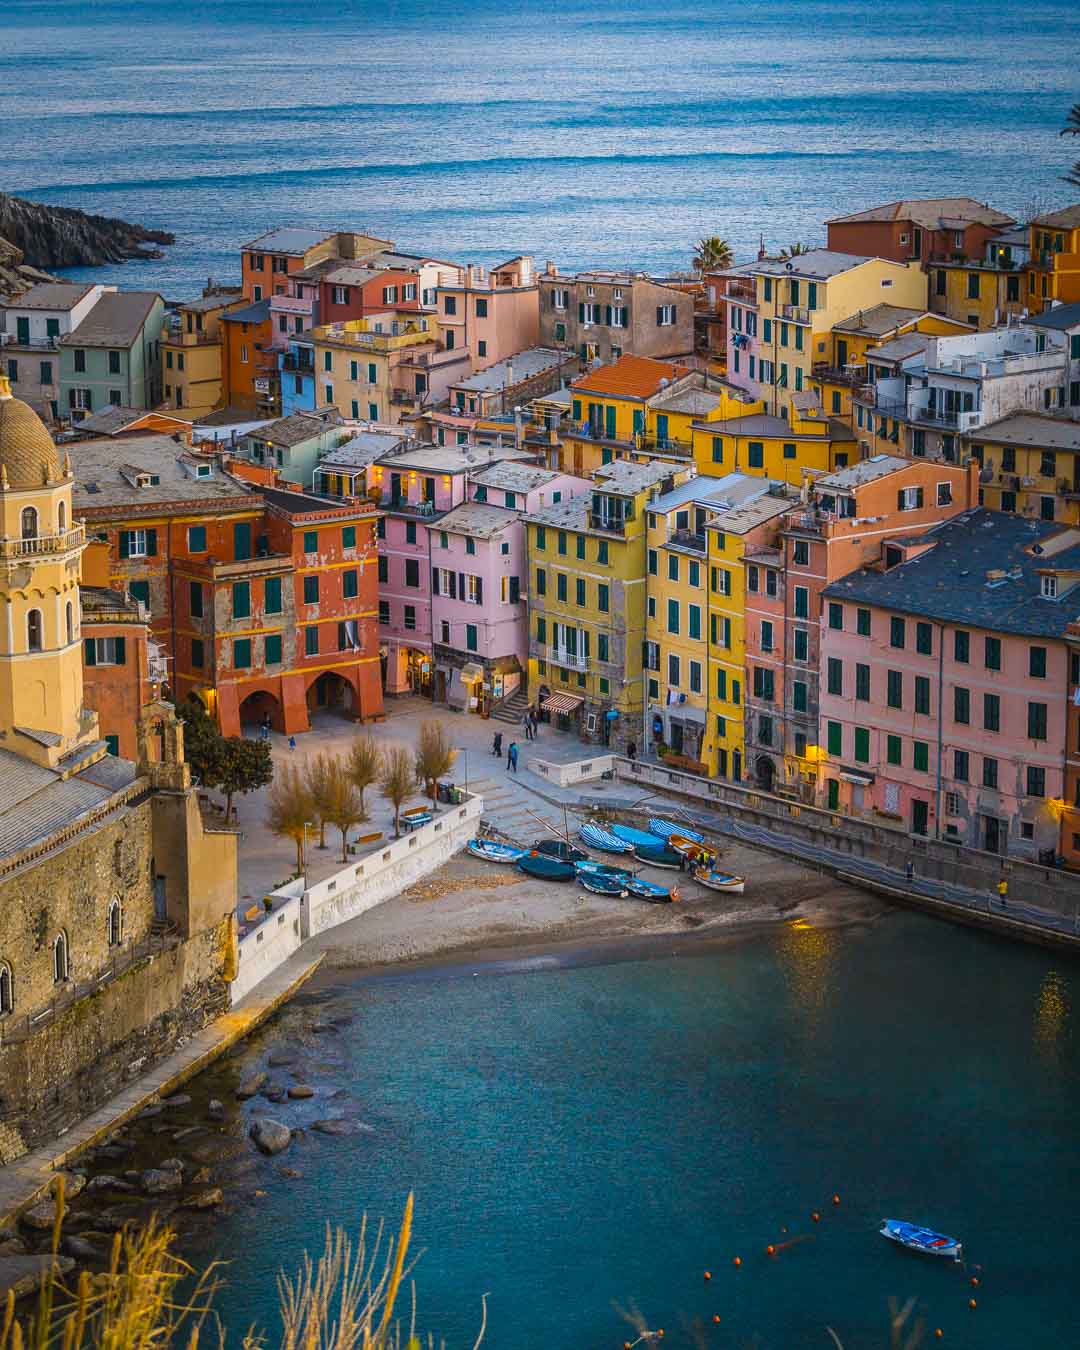 plan your trip to vernazza and book the best hotel